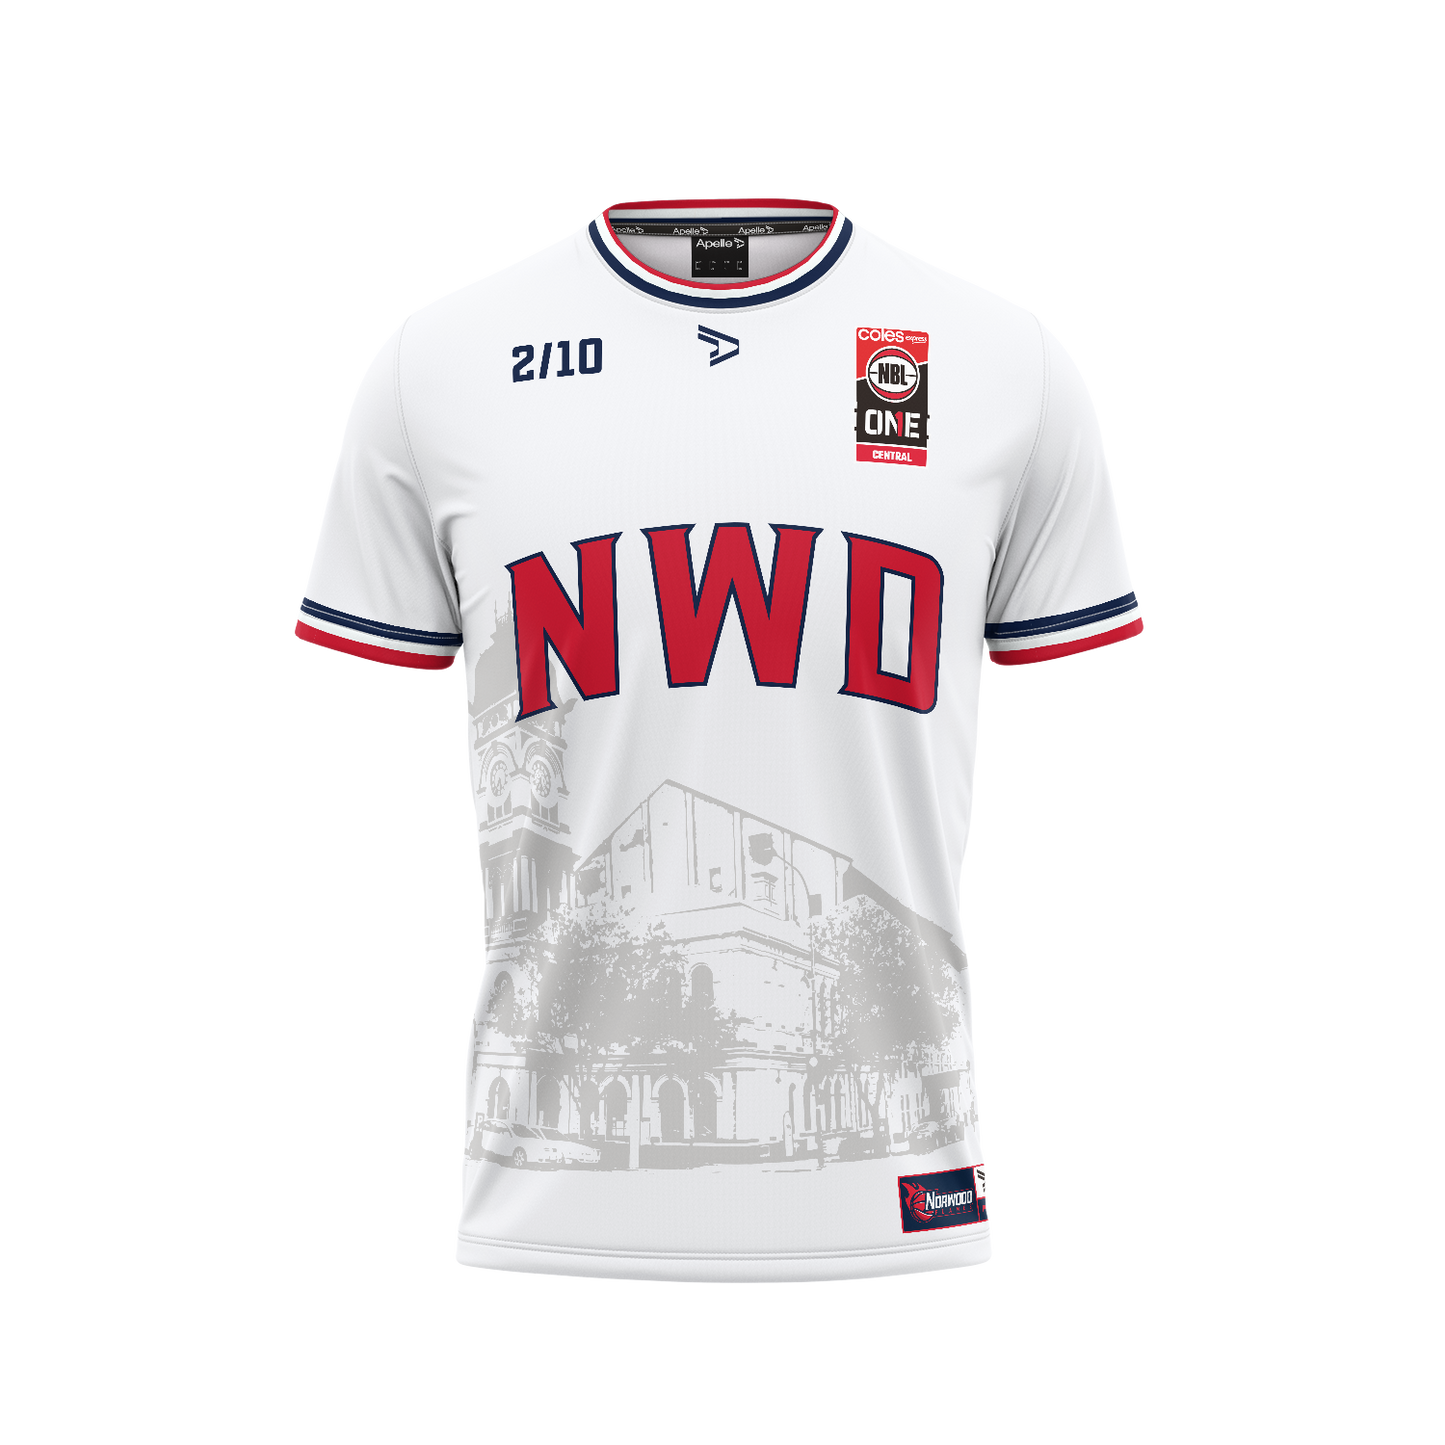 NORWOOD FLAMES - SUPPORTER JERSEY WHITE (NO NUMBER)